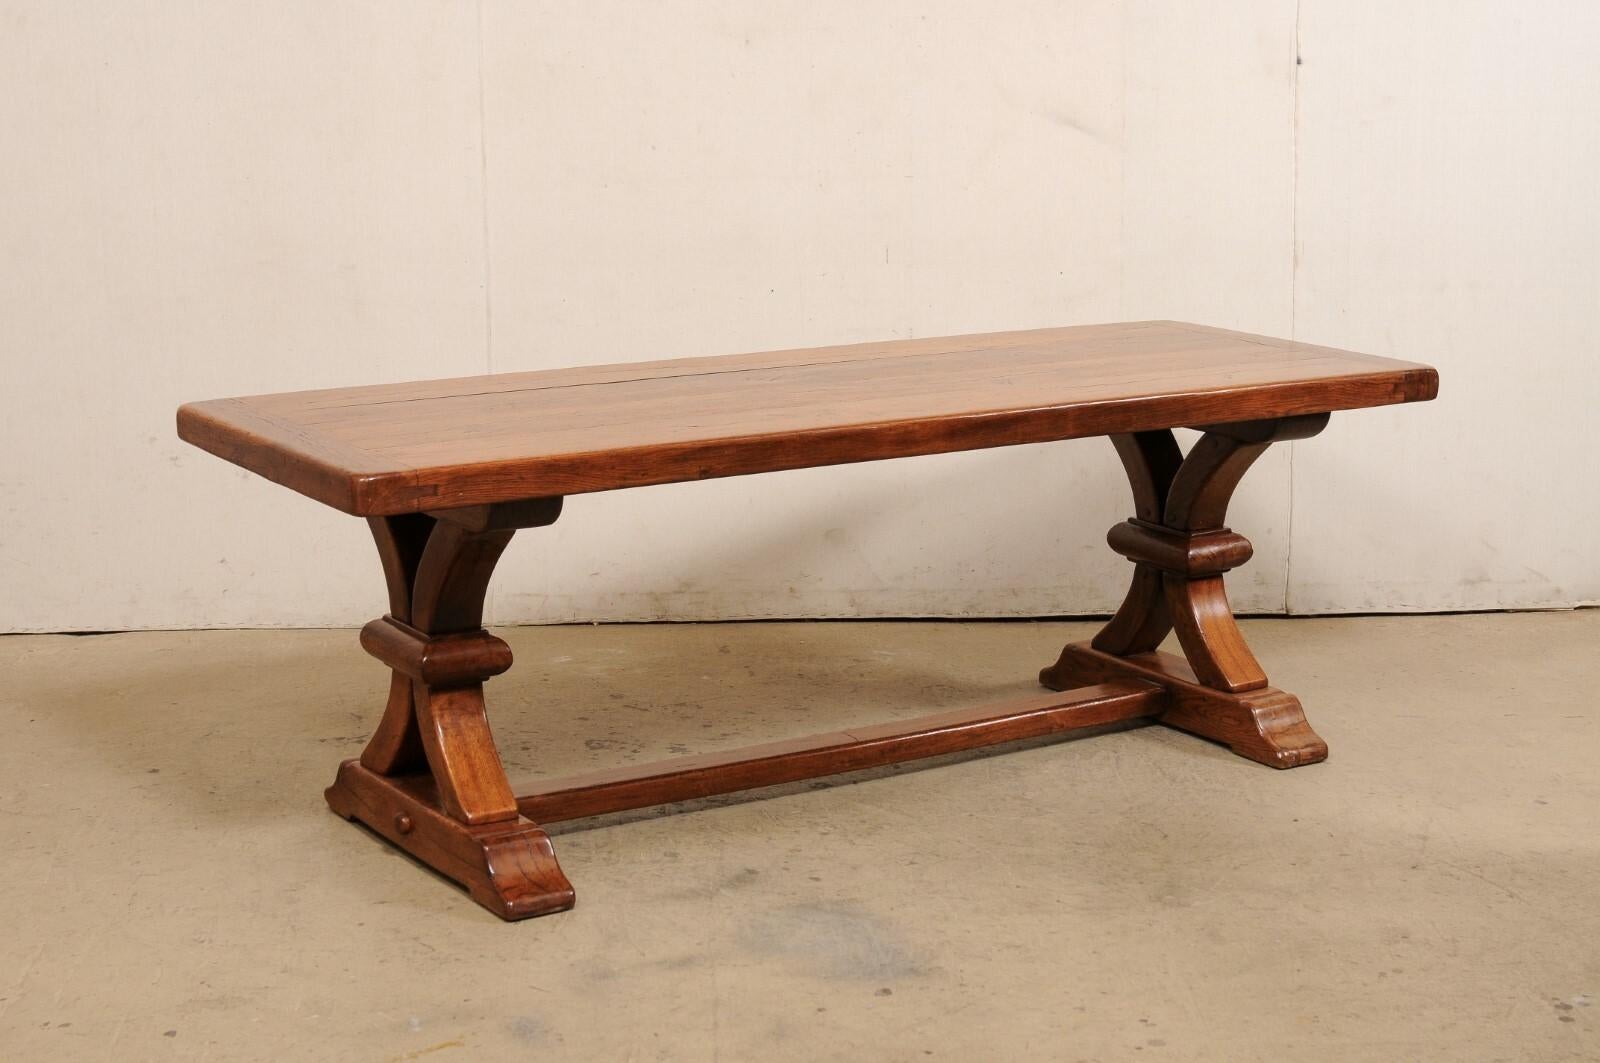 Antique French Wooden Dining Table w/Nicely Carved Trestle Legs, 7+ Ft Long For Sale 5